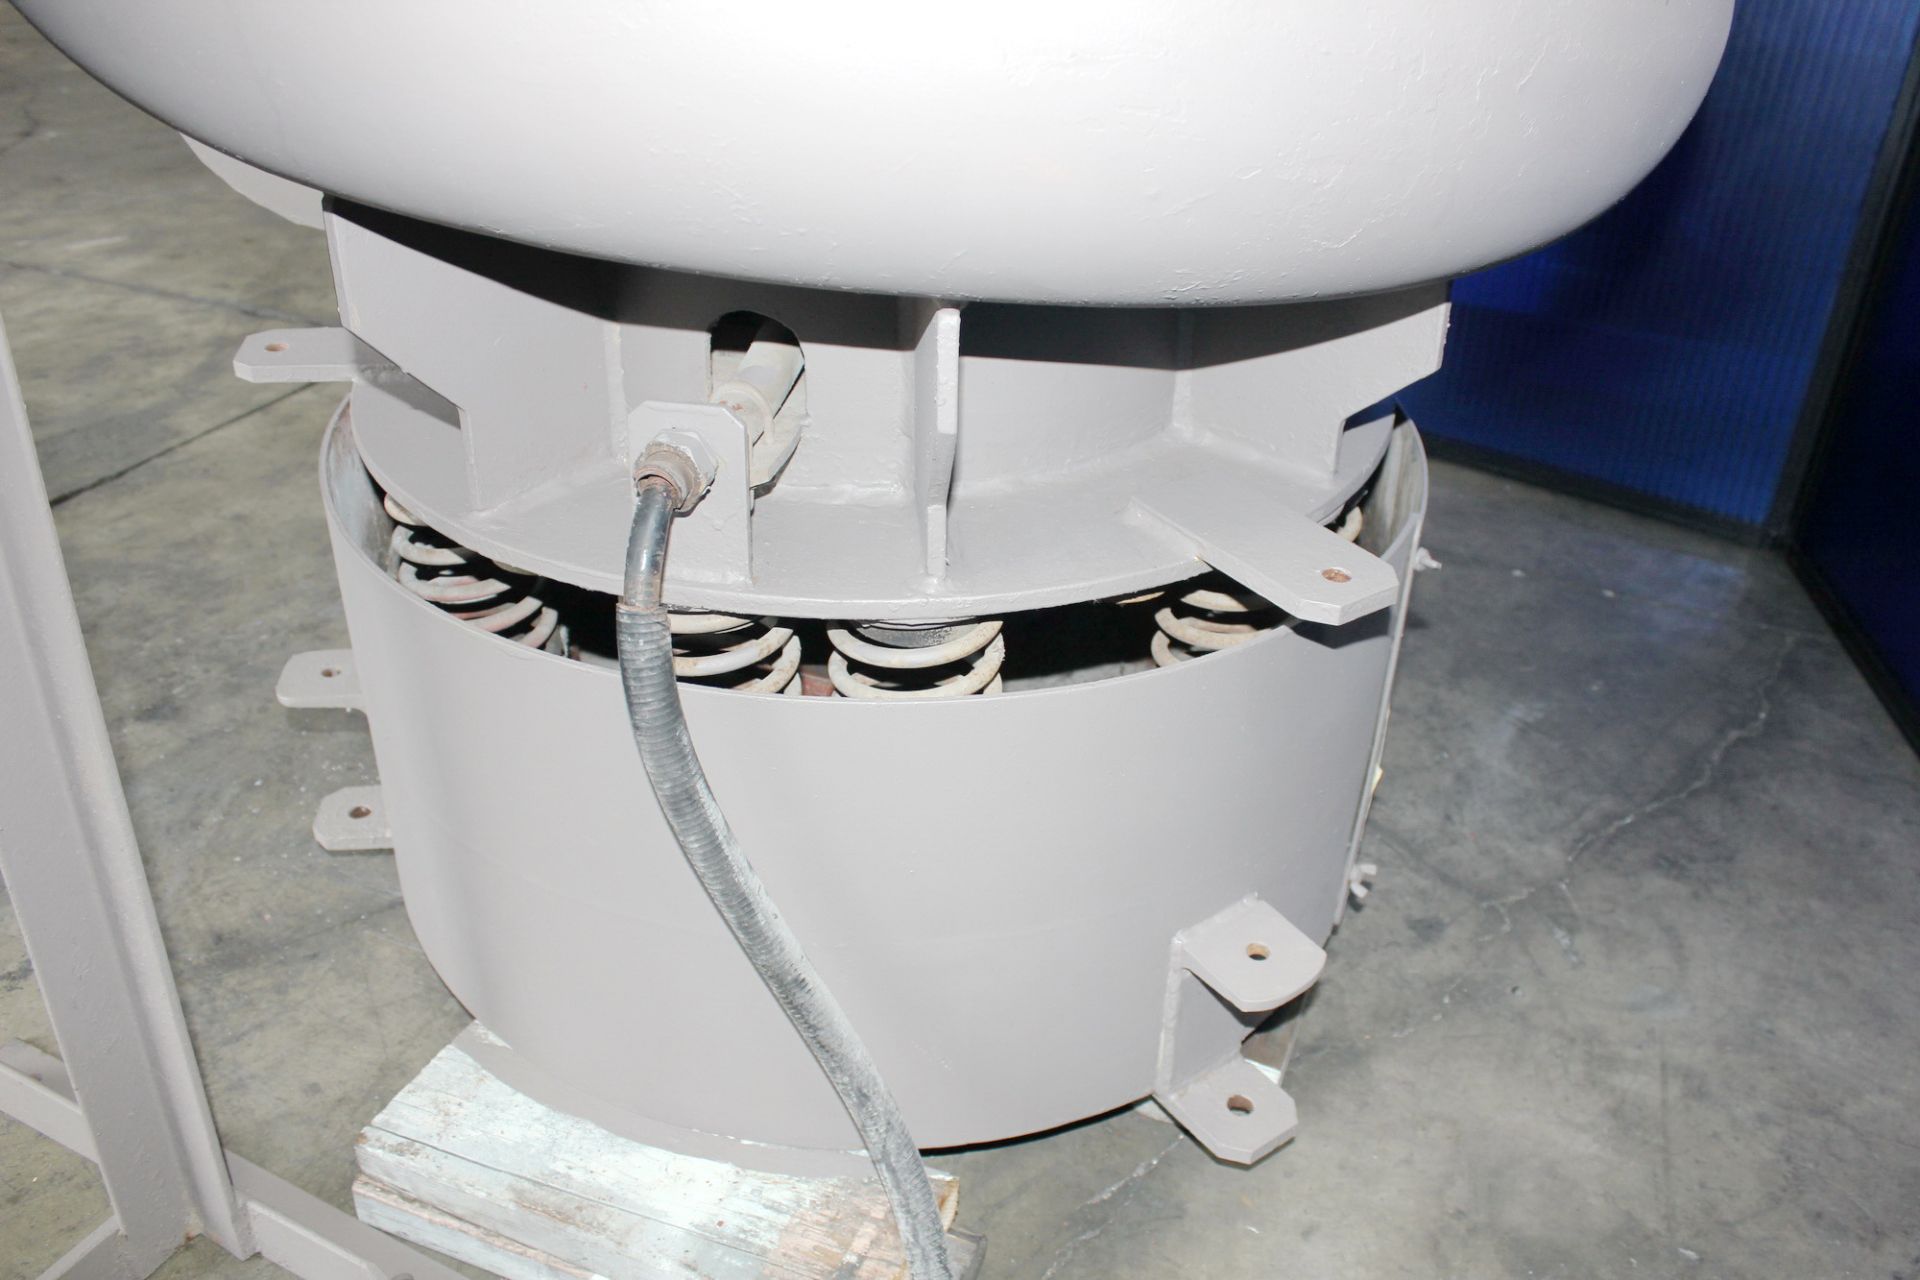 Gyromatic - Vibratory Deburring Machine (Bowl Type) | 4.5 Cubic Feet, Located In Huntington Park, CA - Image 11 of 13